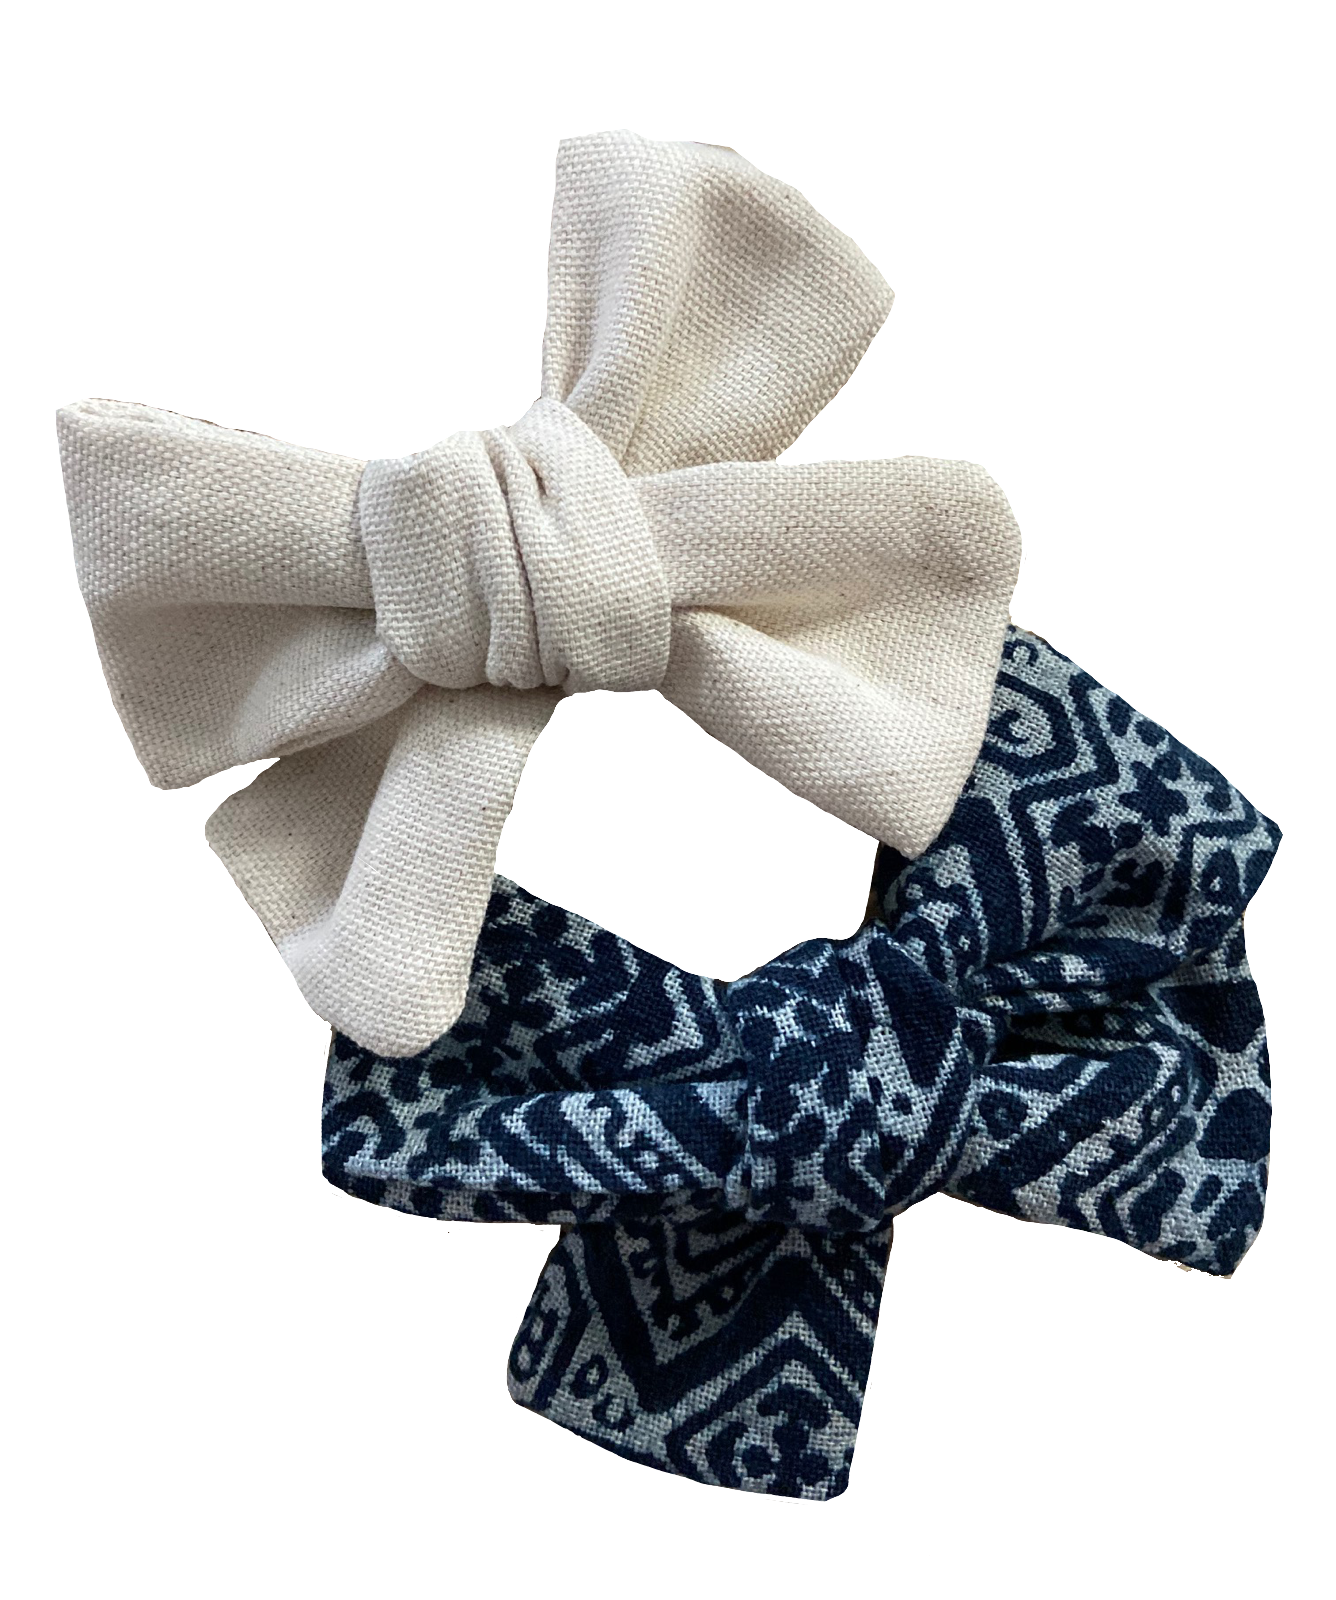 The perfect hair ties for your baby girl. Keep their hair neat with our handcrafted bow ties.